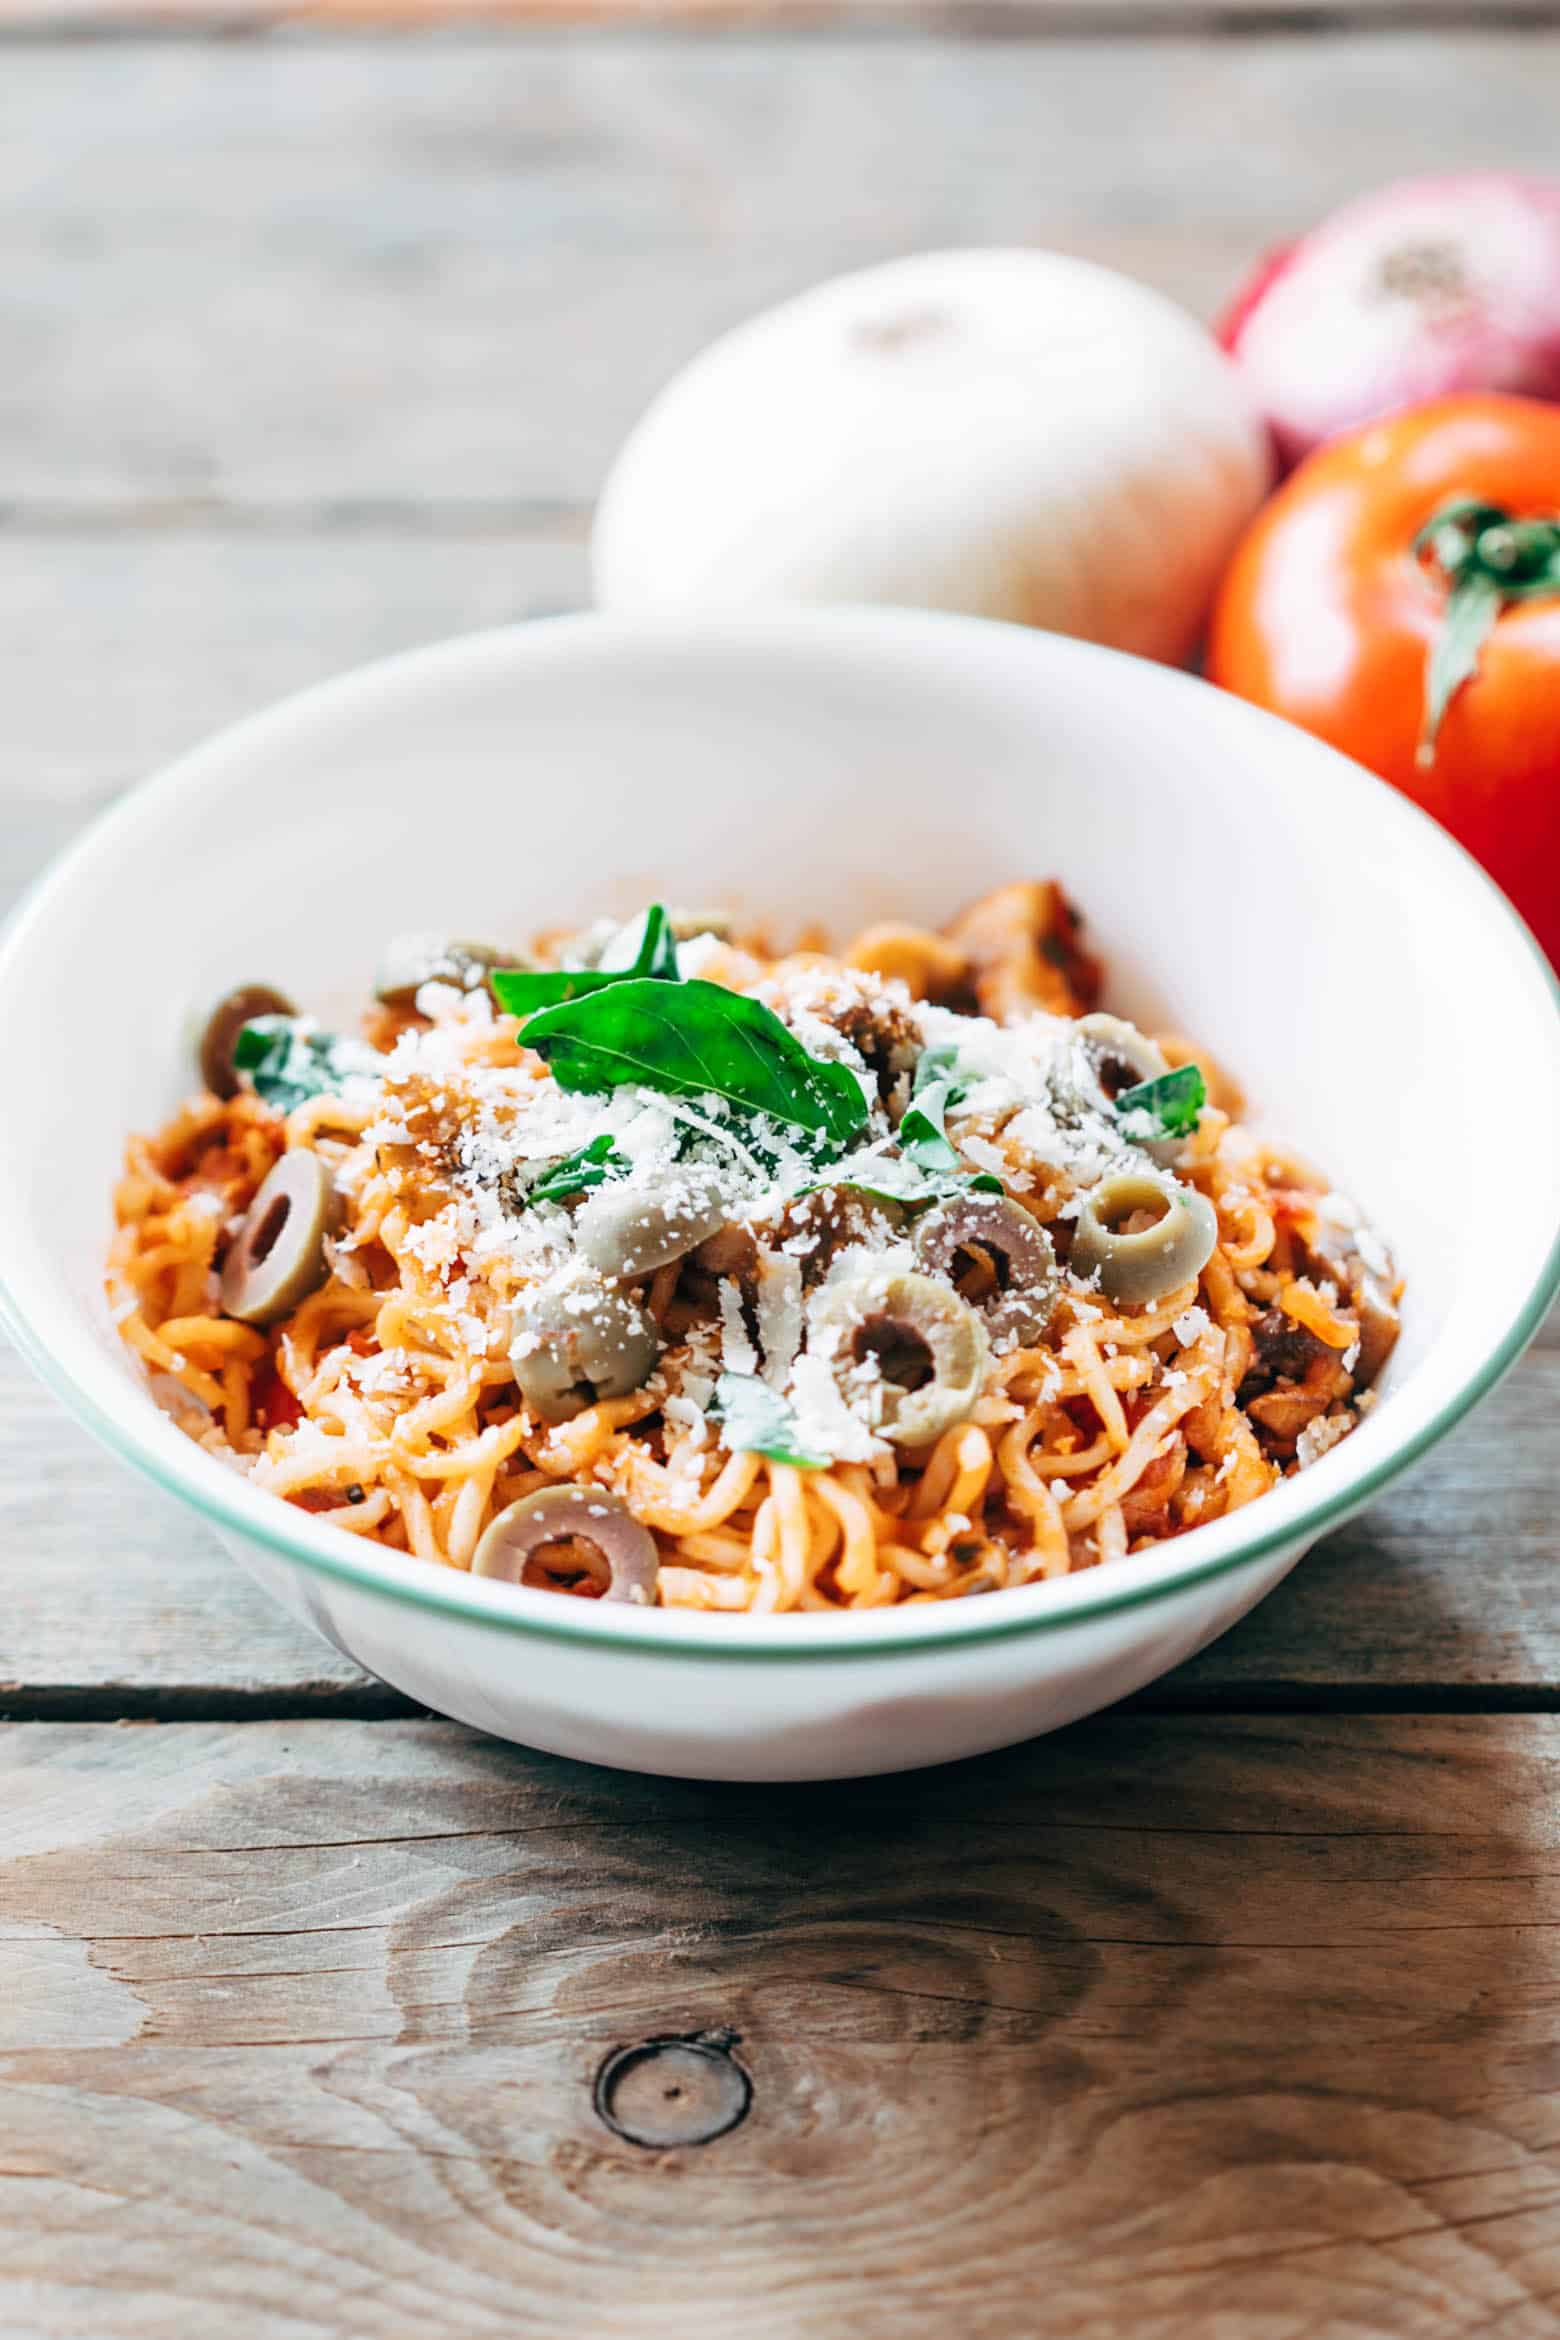 Italian Maggi recipe has all the flavours of your favourite pasta and pizza with mushrooms, marinara sauce, olives, basil and lots of cheese. Here are four amazing maggi recipes in one post that you must try - Italian Maggi, Cheese and Egg Maggi, Chinese Maggi and Spicy Masala Maggi for all your Maggi lovers!